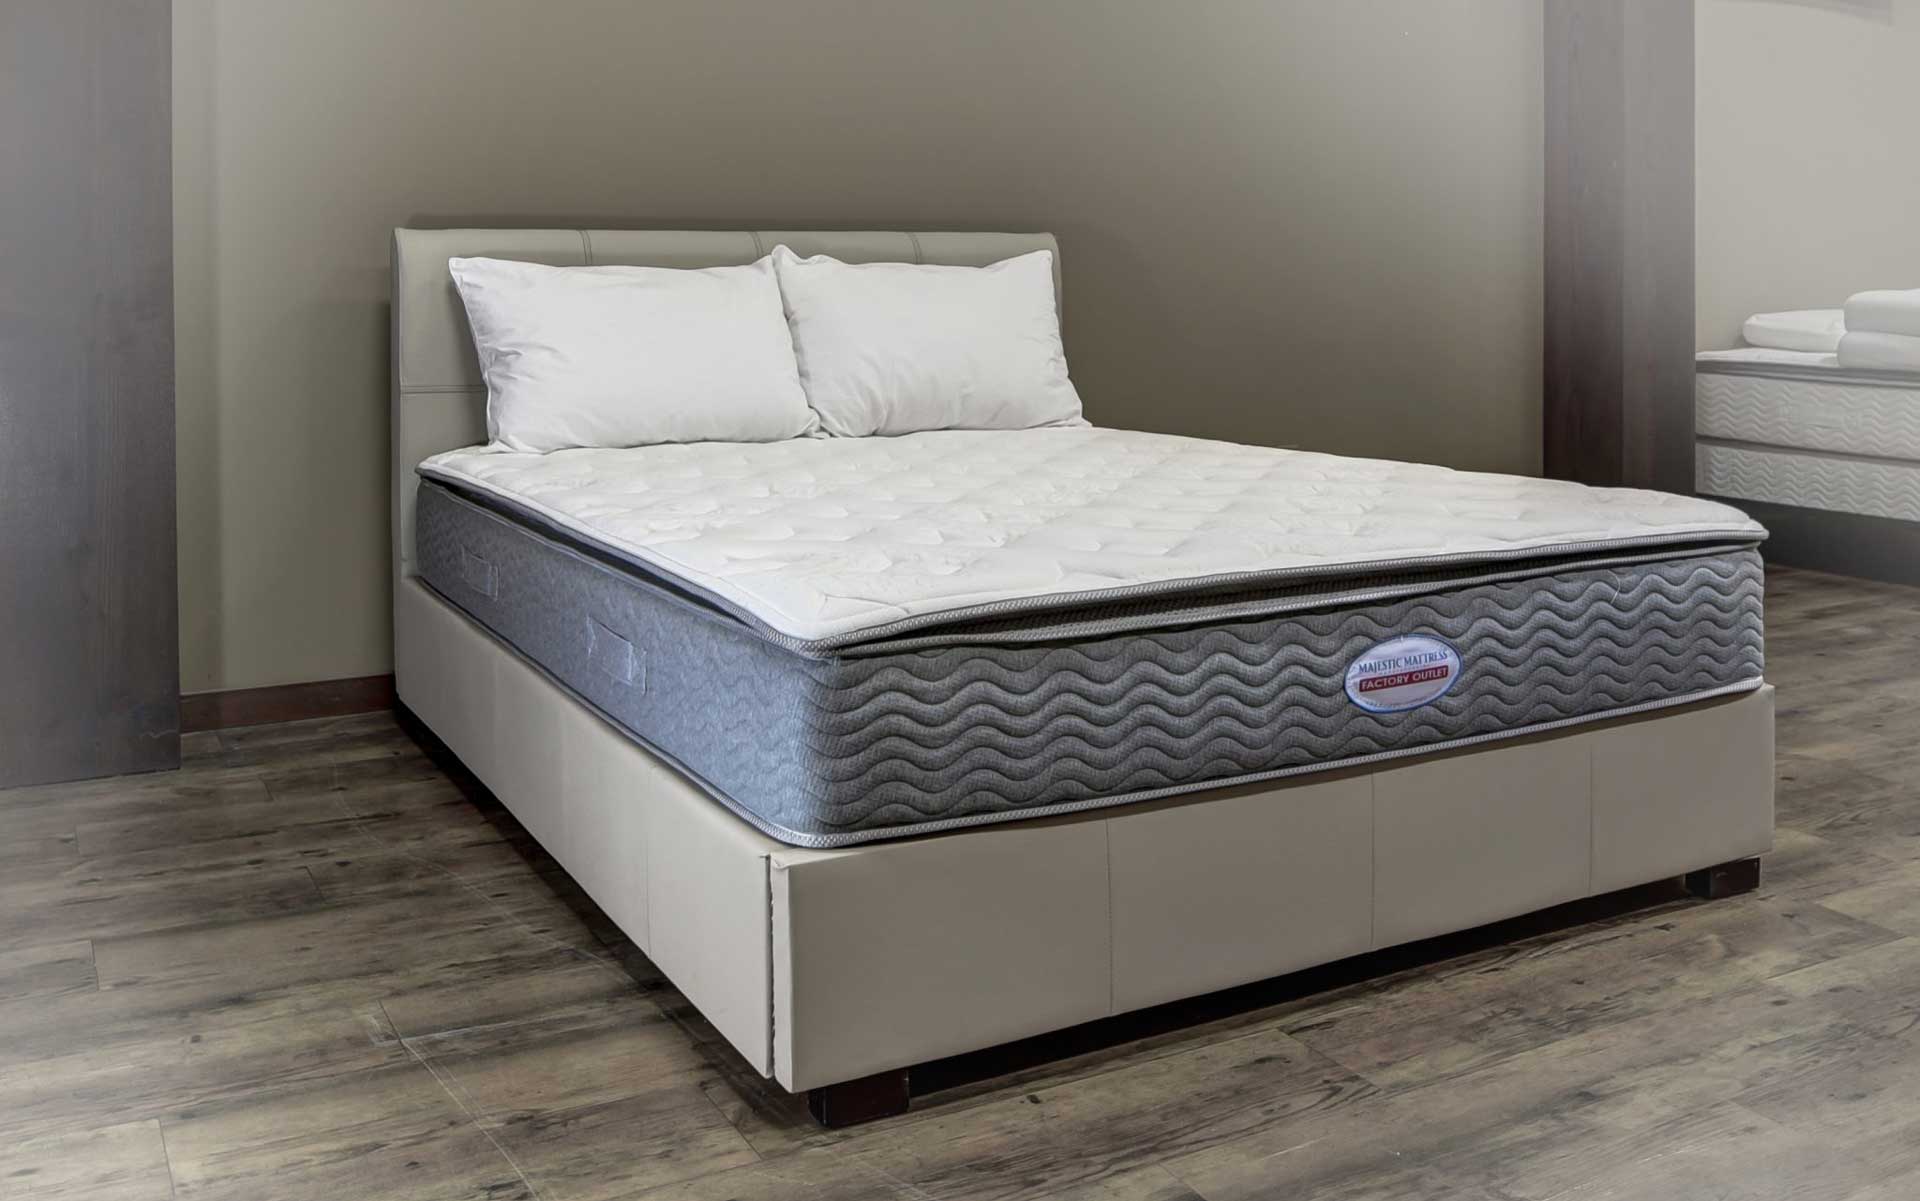 Find Mattresses in Florence Graham California